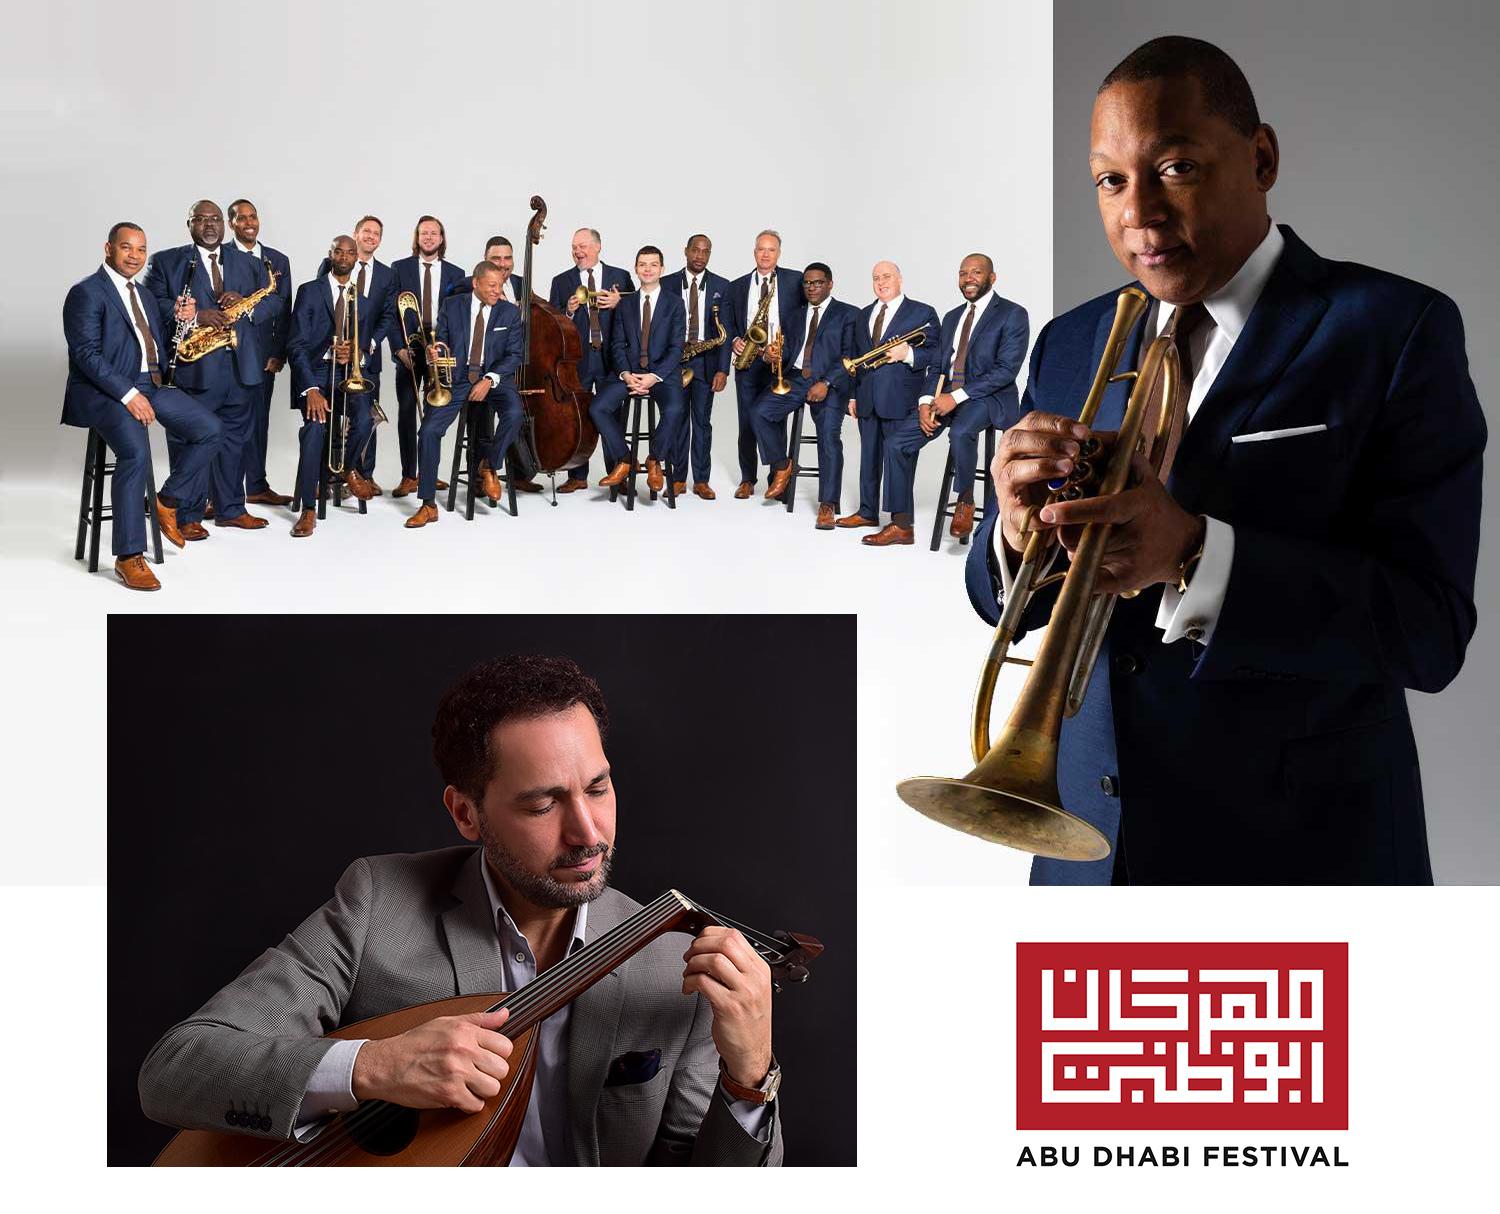 A group of men posing with music instruments, and the logo for Abu Dubai Festival.